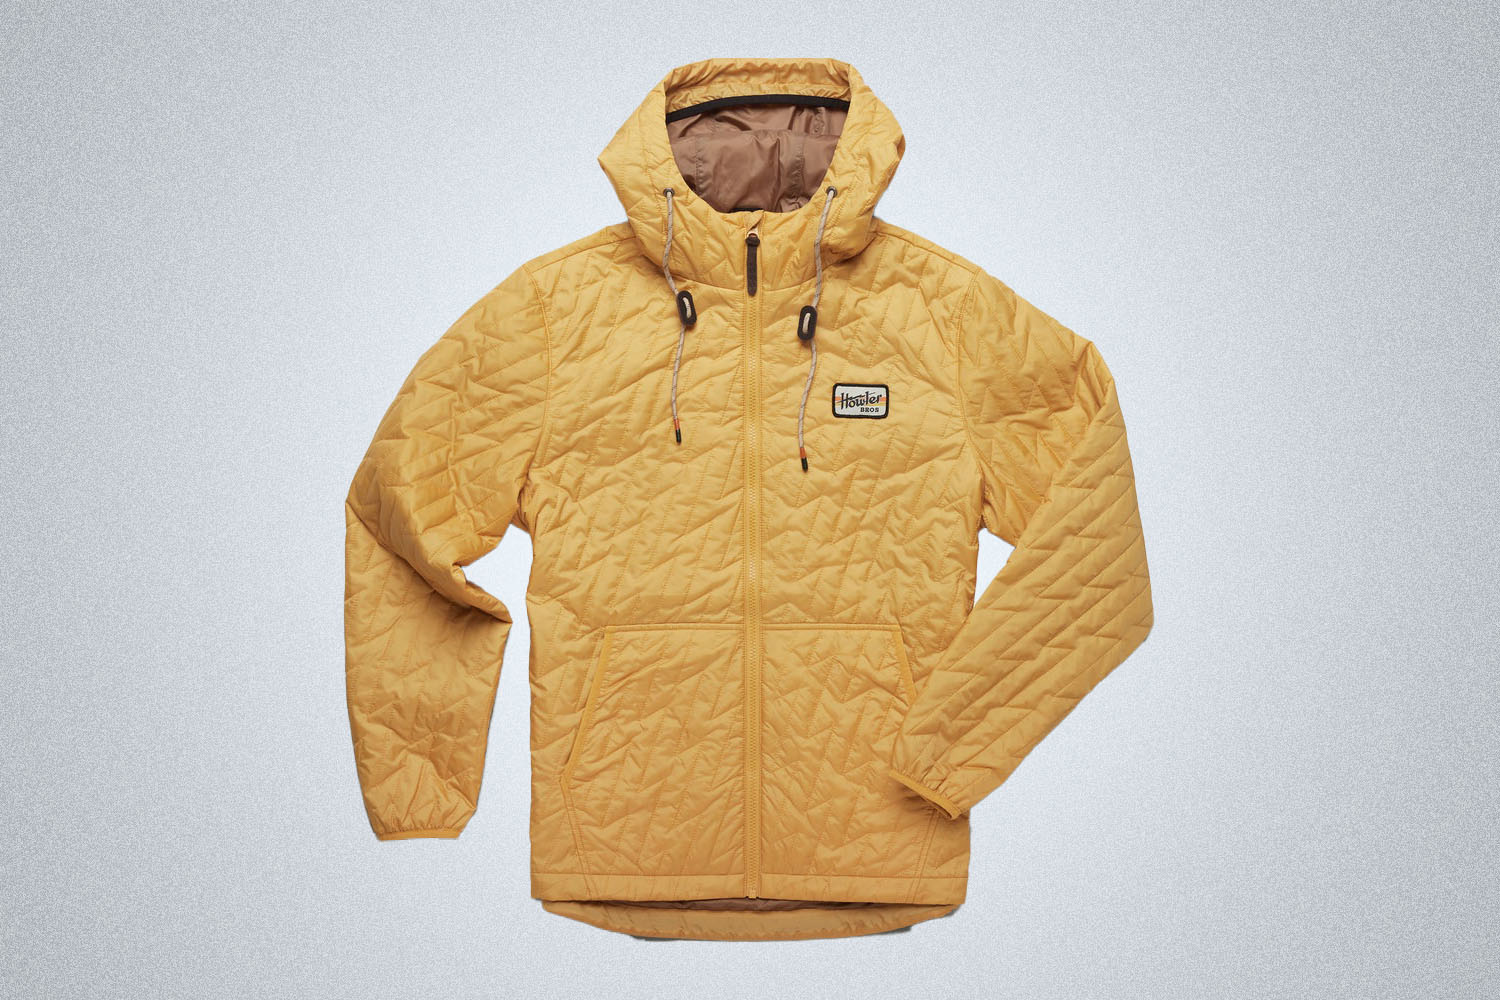 The Howler Bros Voltage Full Zip Jacket in black or yellow is the best jacket for the outdoors when it's cold outside in 2021